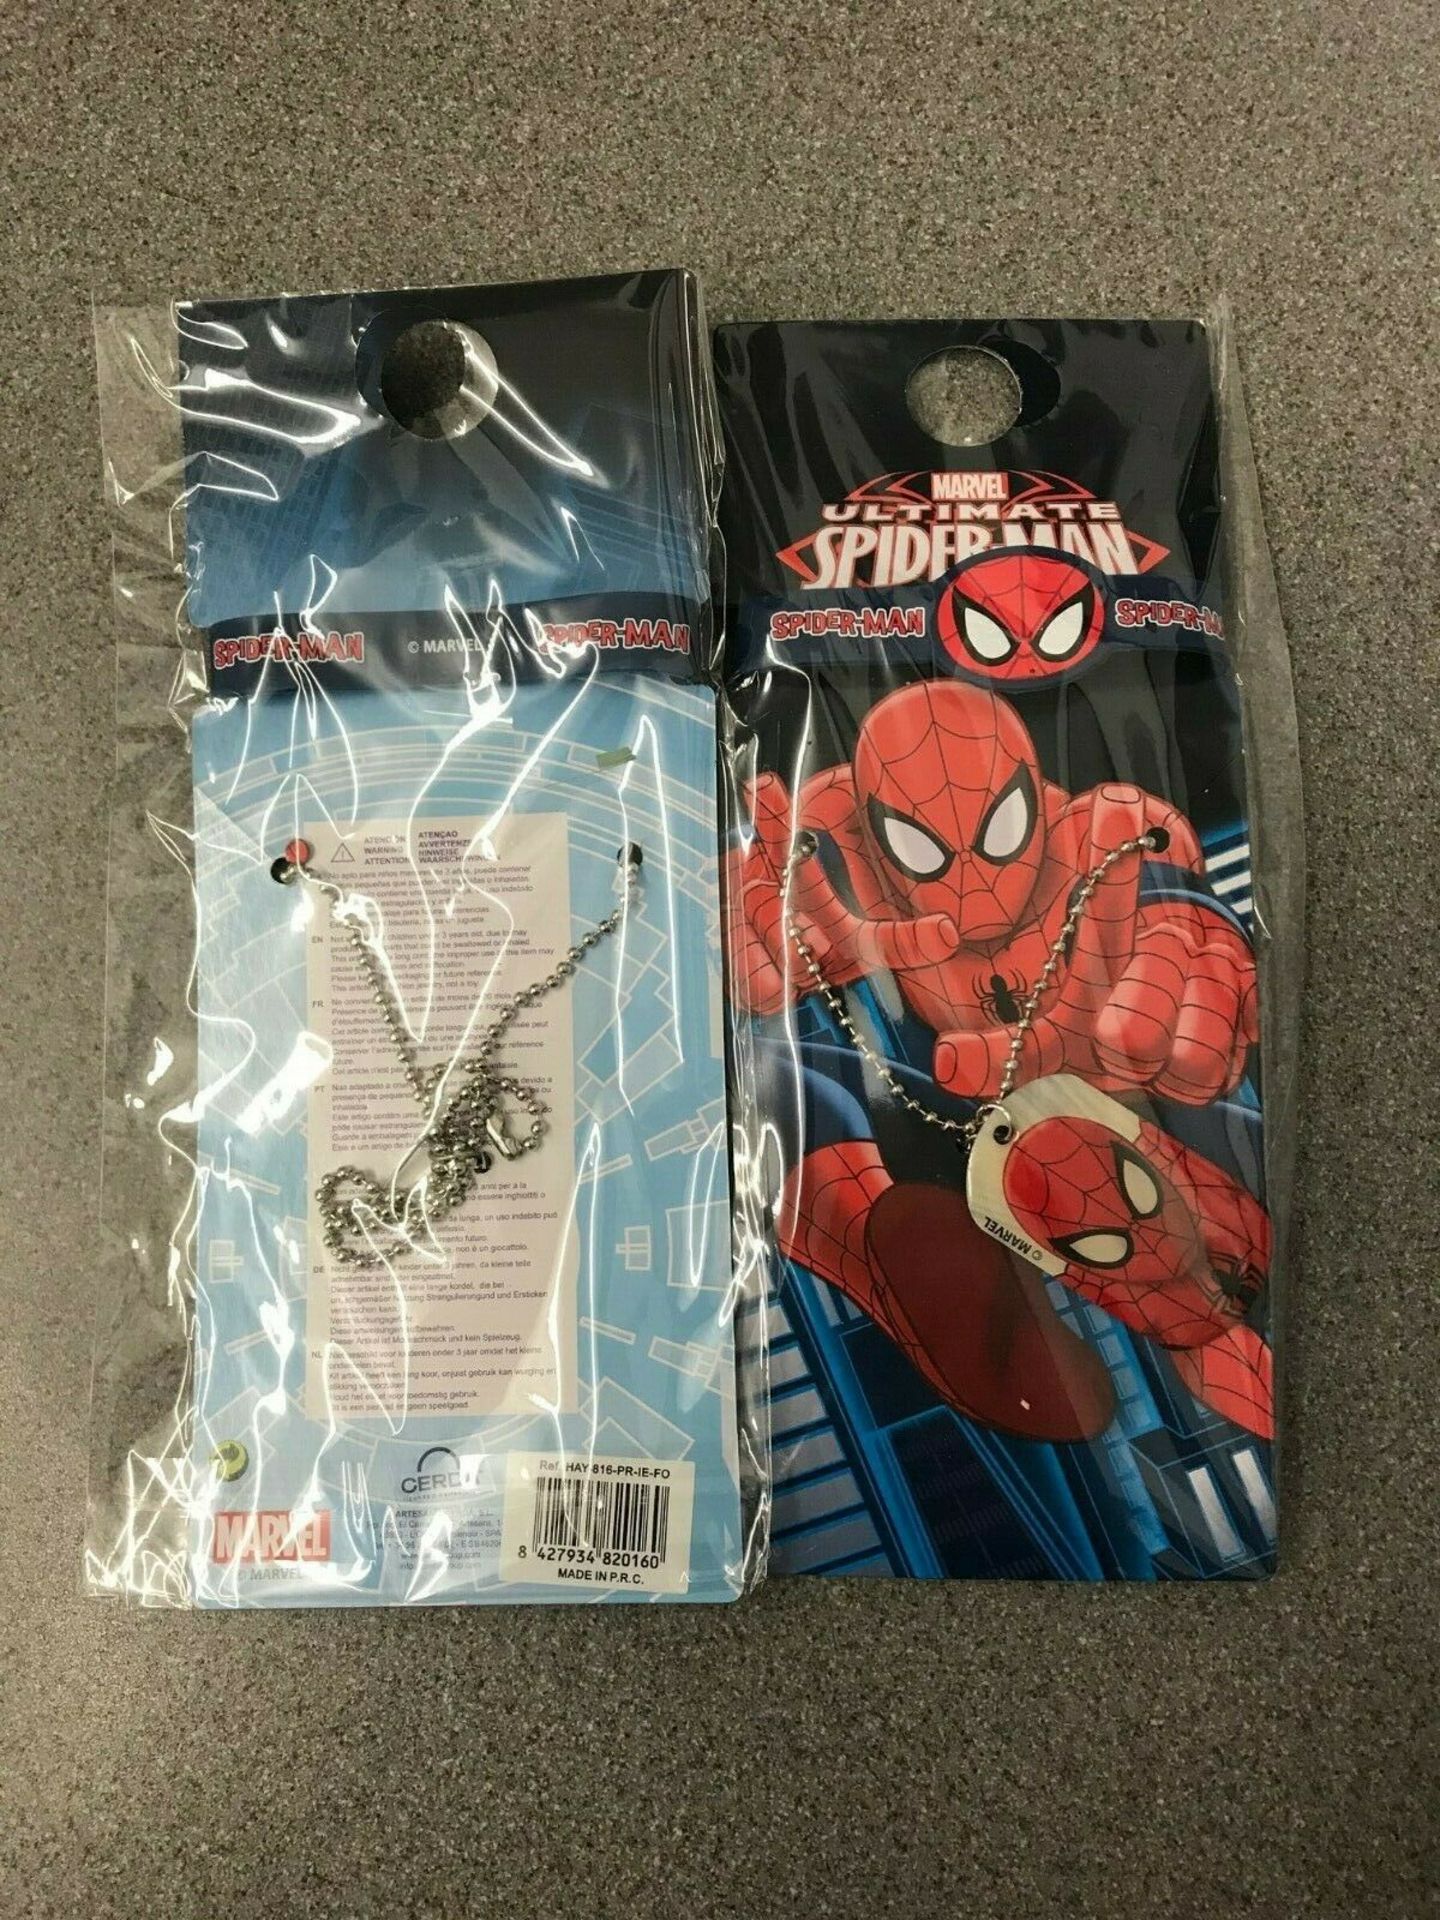 WHOLESALE JOB LOT 96 X BRAND NEW SPIDERMAN NECKLACE AND BRACELET SET. RRP £4.99 EACH. BR... - Image 2 of 3